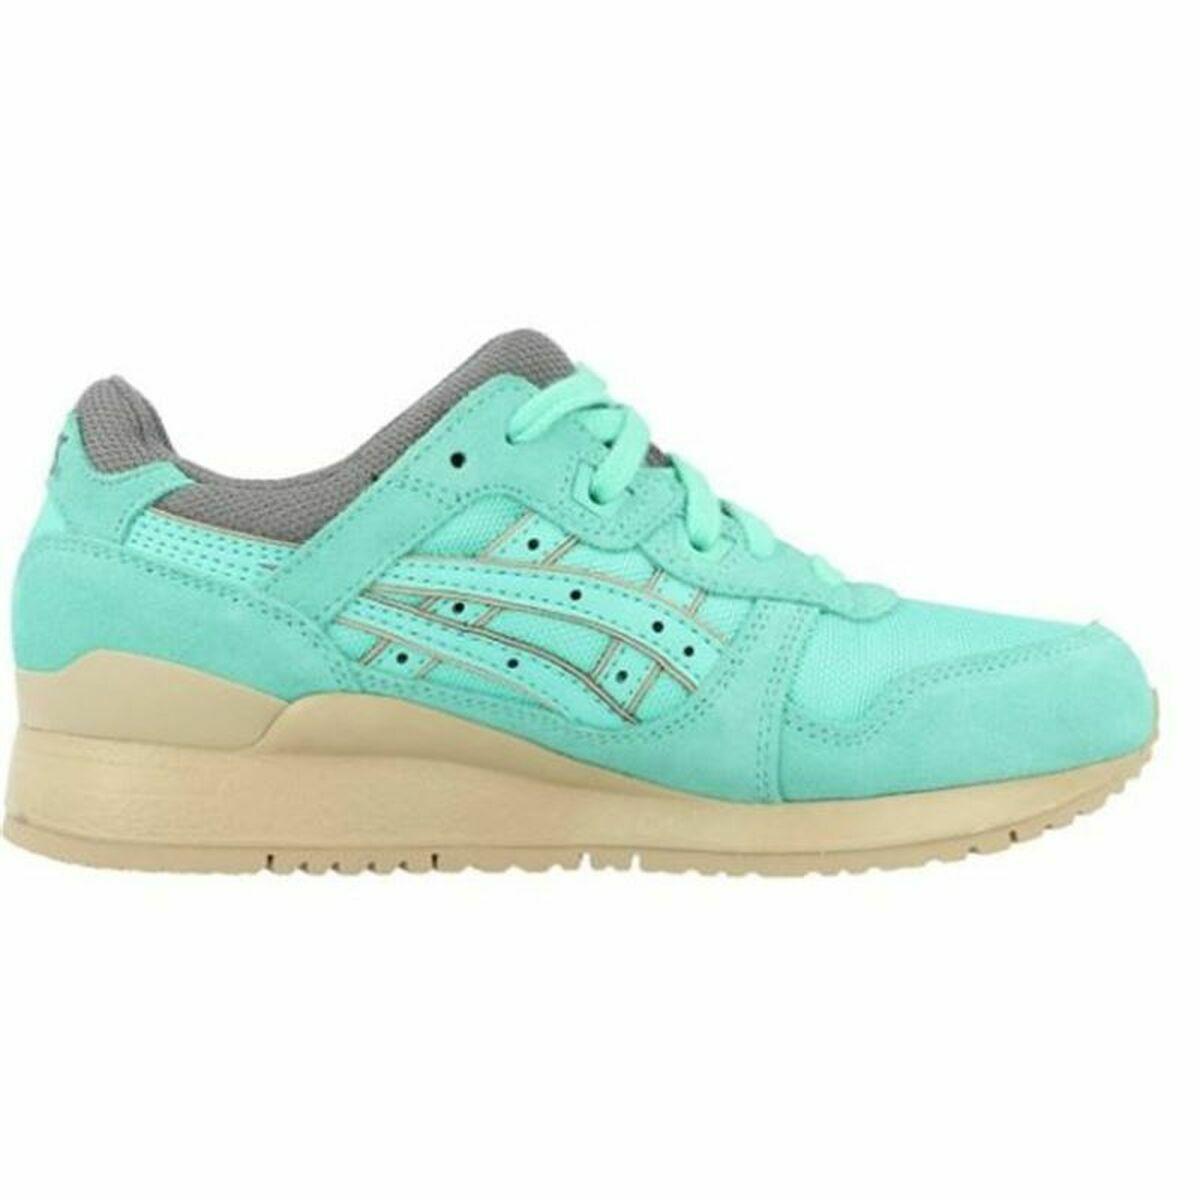 Asics Women's Casual Trainers Gel-lyte Iii Turquoise in Blue | Lyst